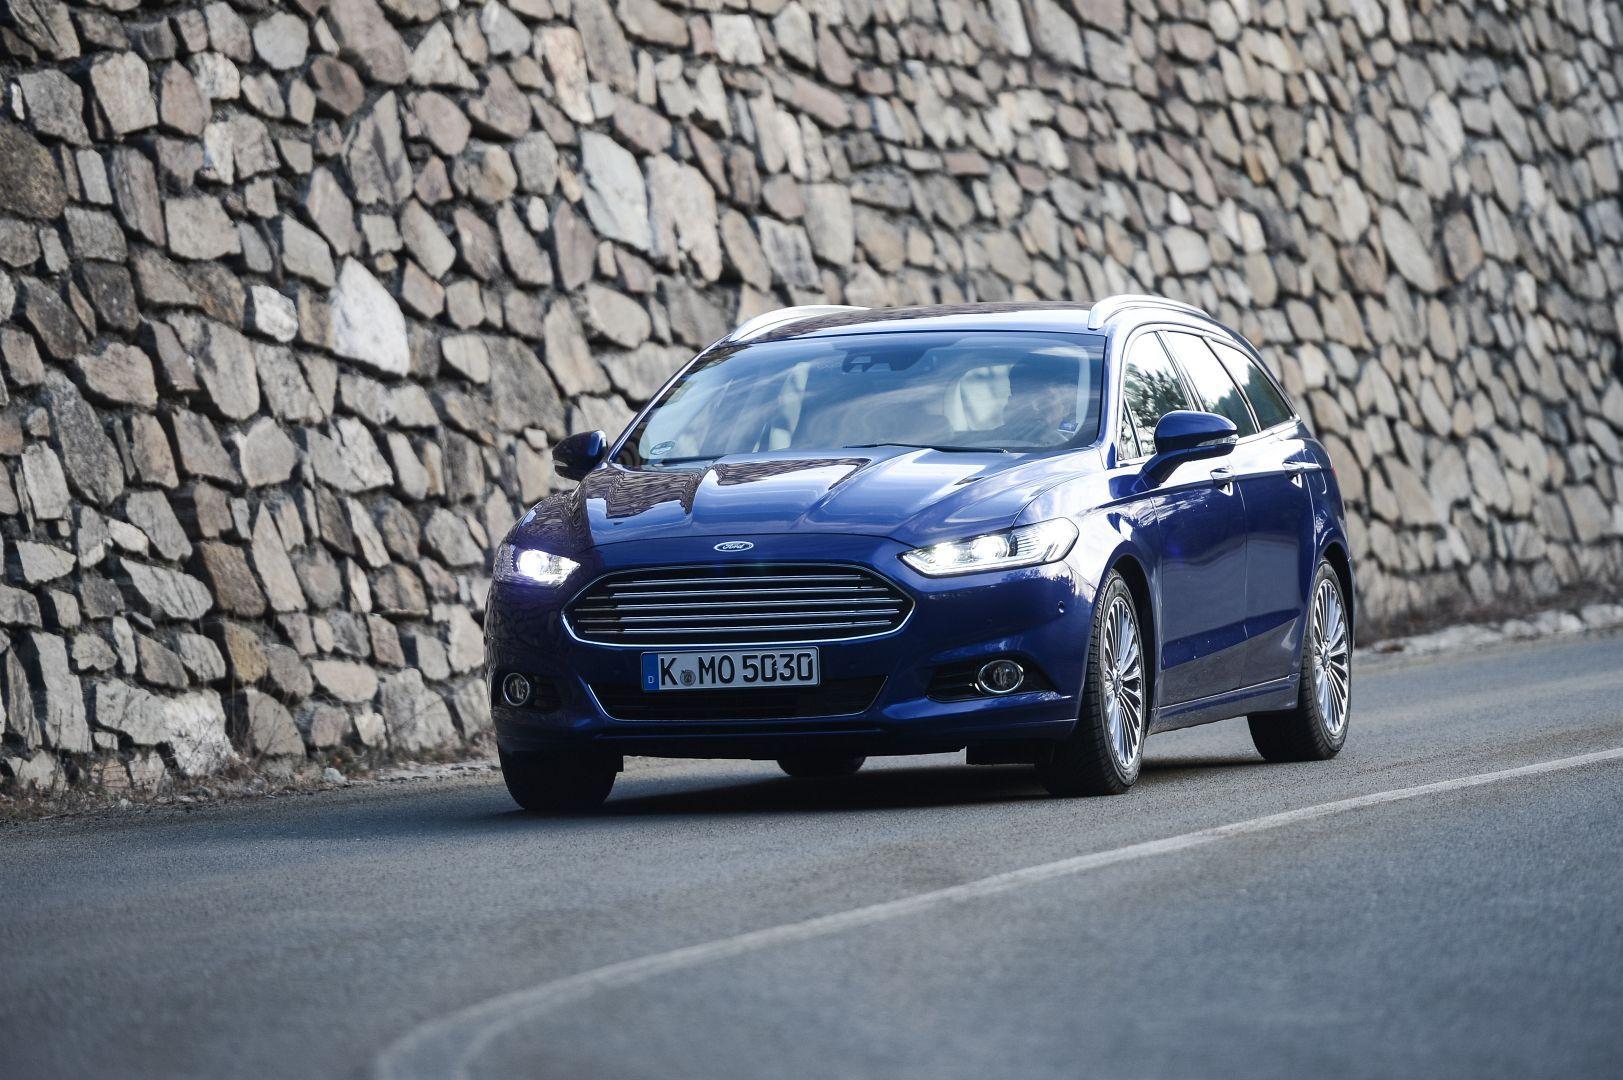 Your Ford Mondeo 2K Wallpapers Are Served